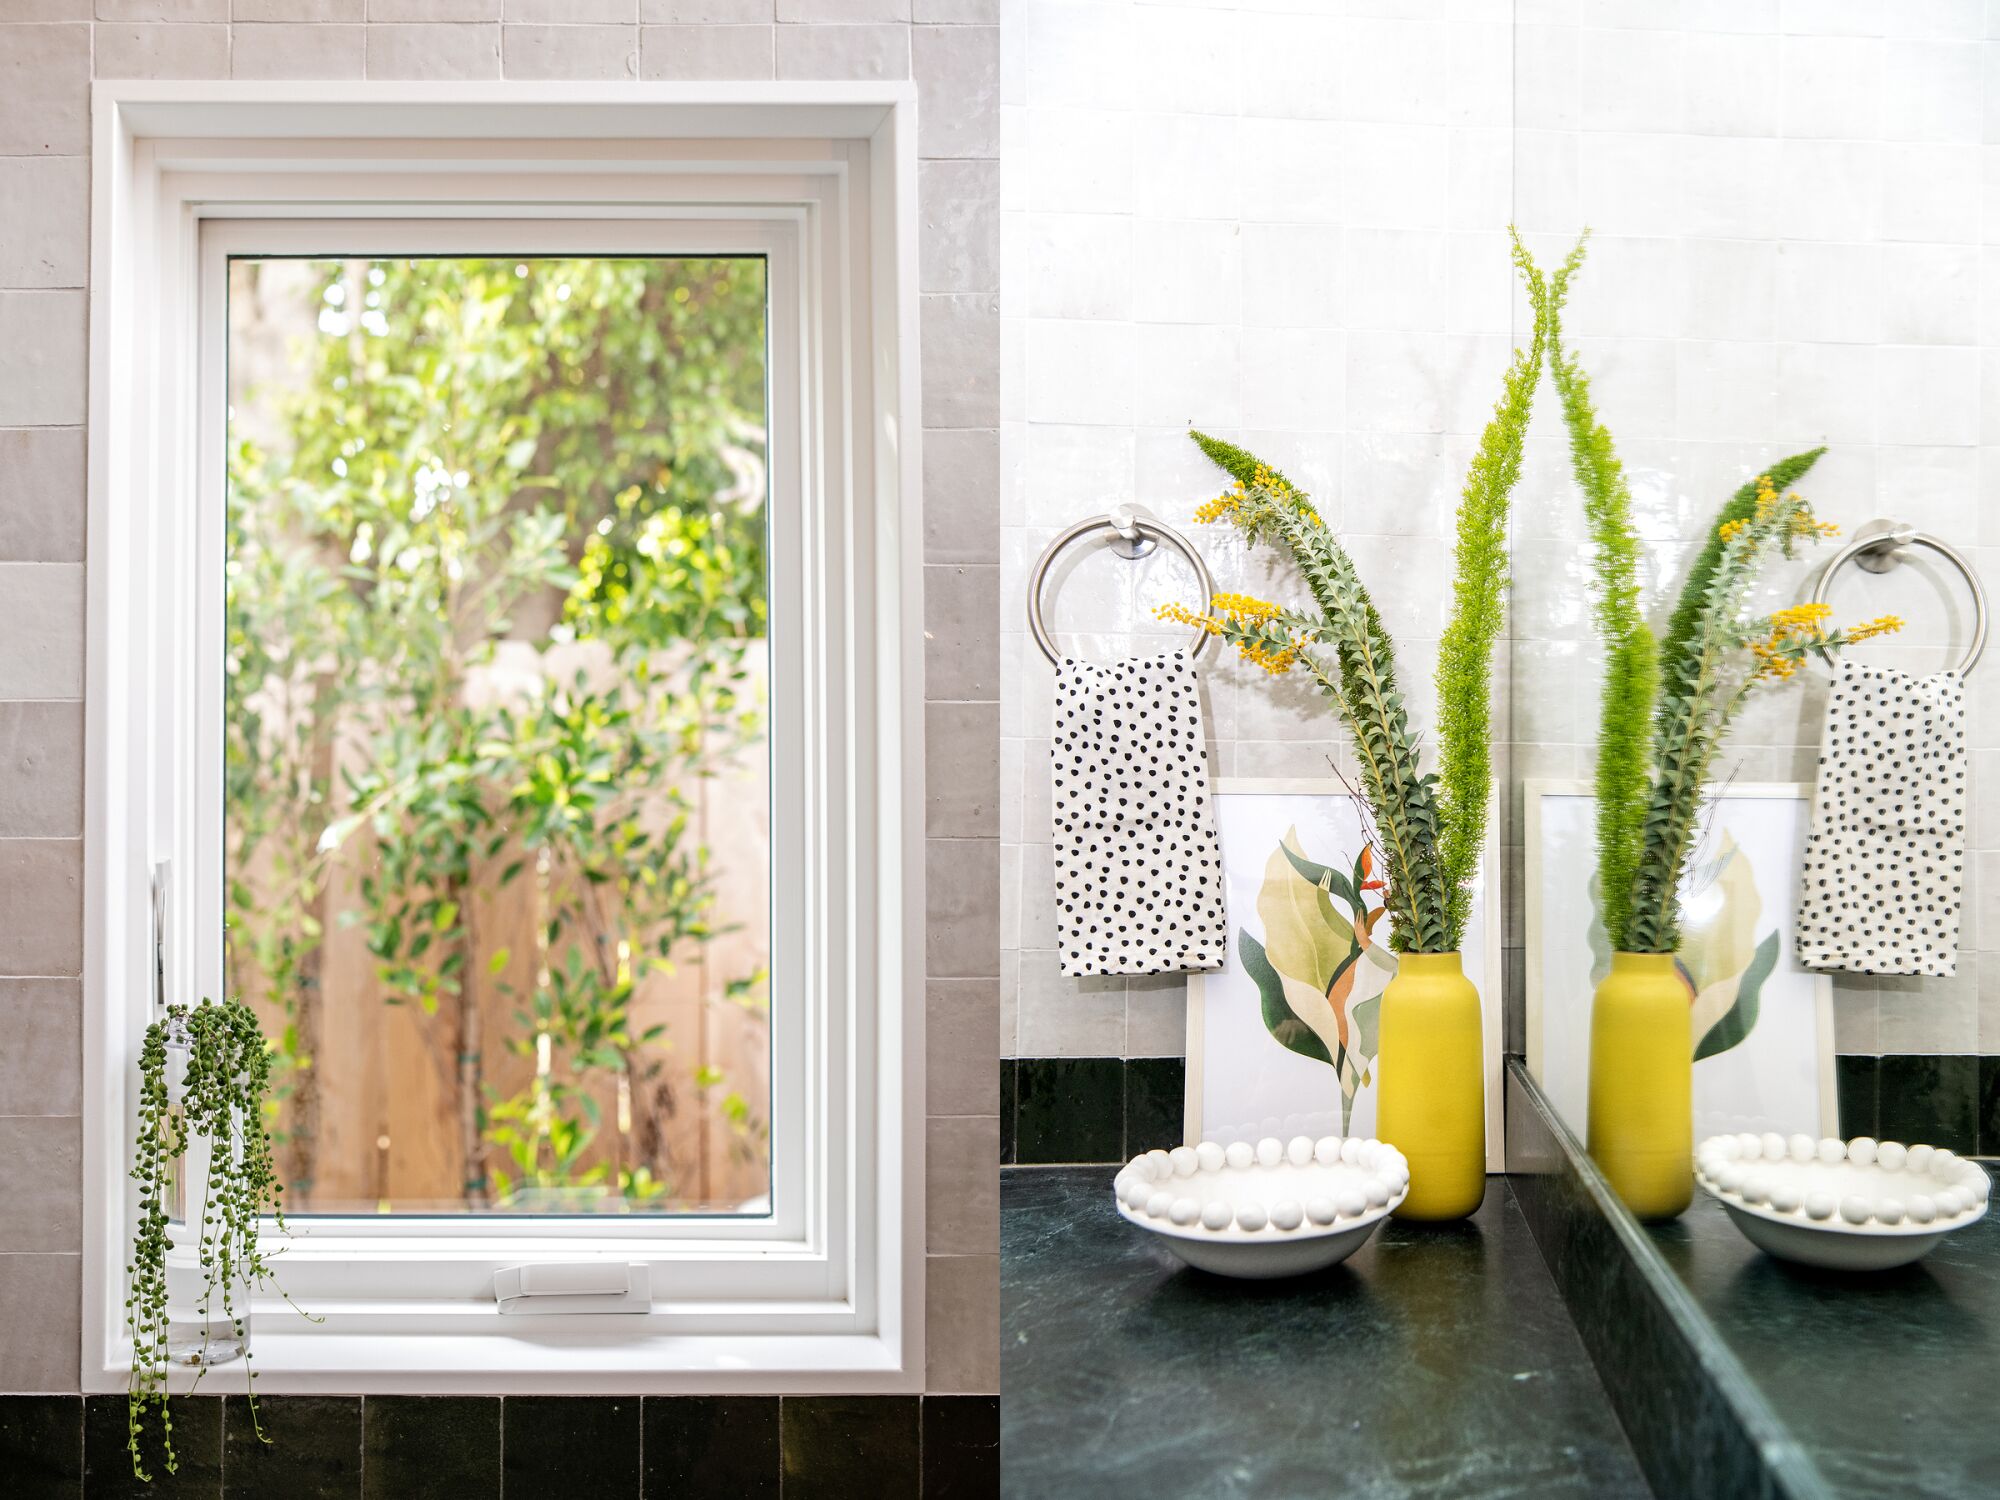 Two side-by-side photos showing a window against green and white tiles, left, and a vase and artwork in a green bathroom, right.